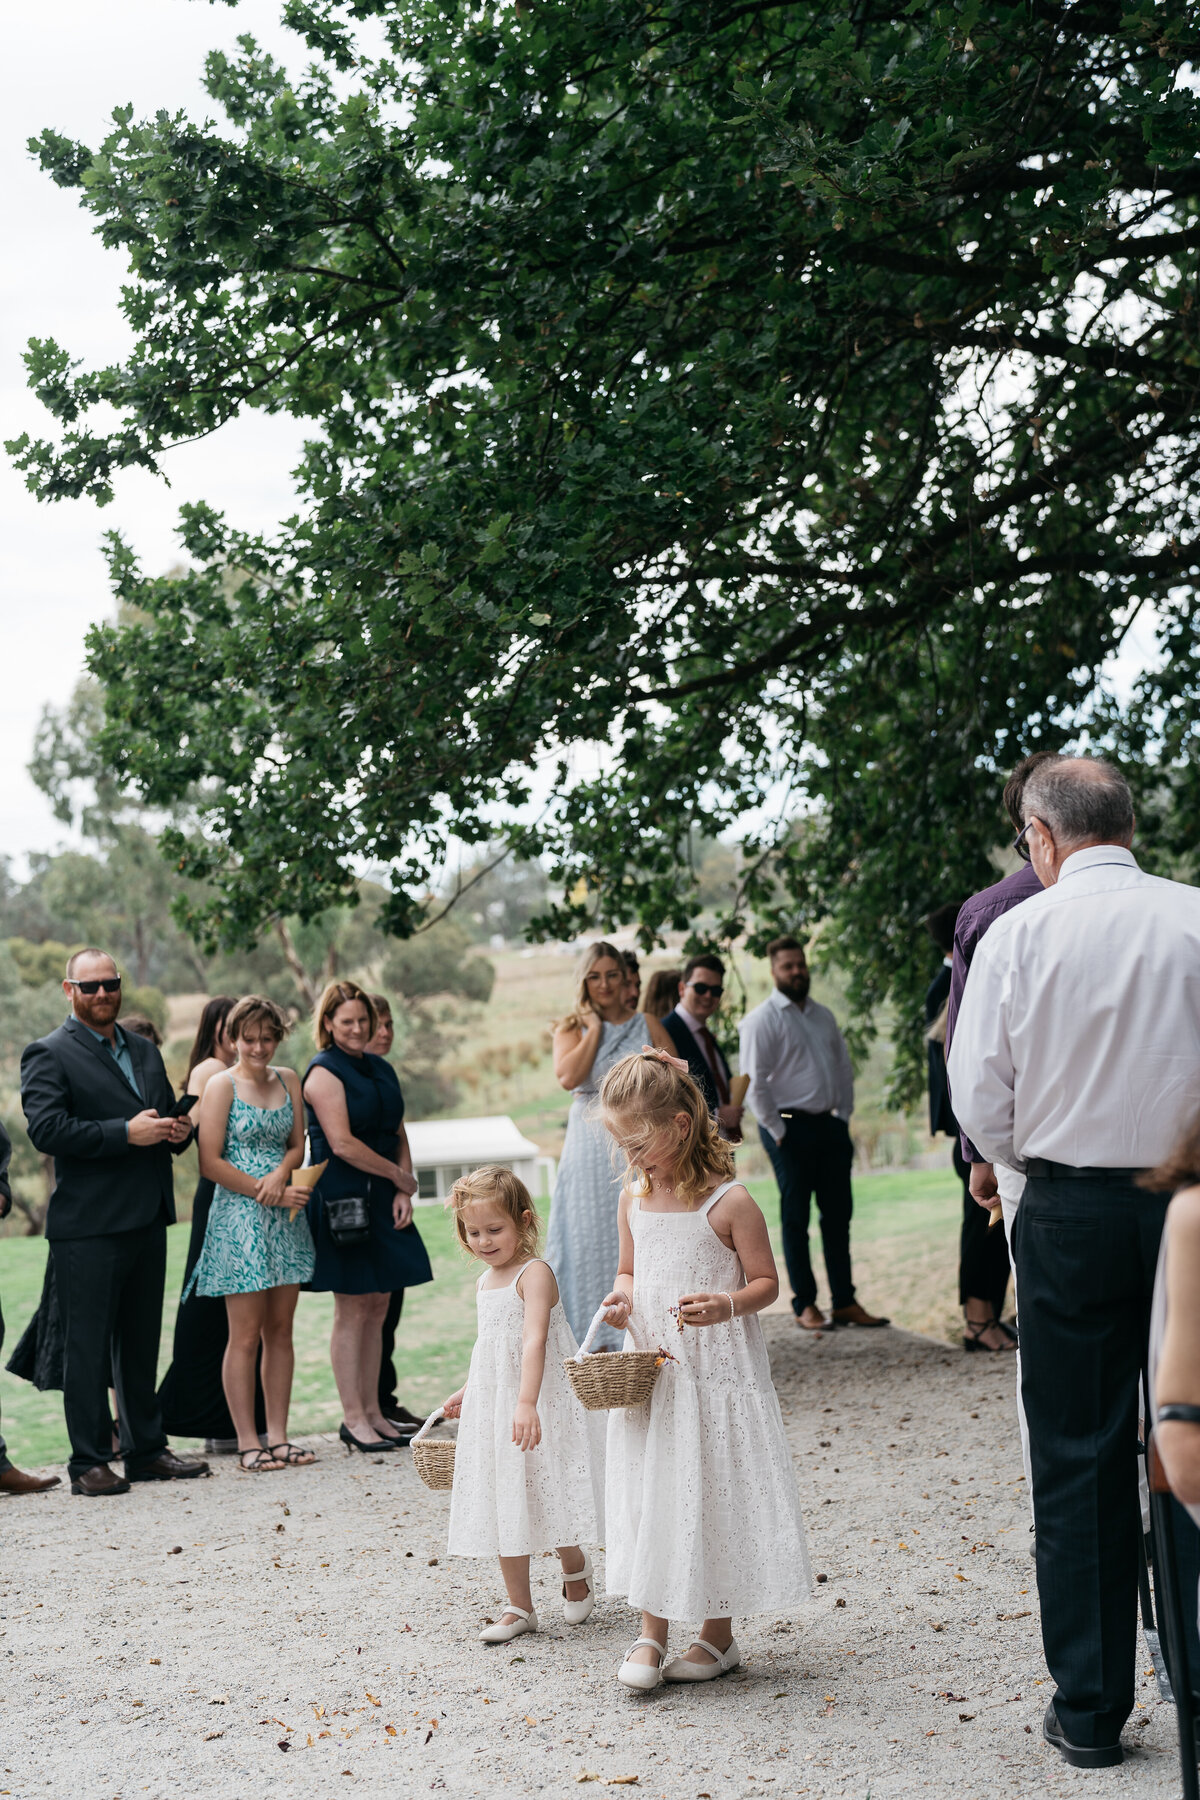 Courtney Laura Photography, Yarra Valley Wedding Photographer, The Farm Yarra Valley, Cassie and Kieren-371